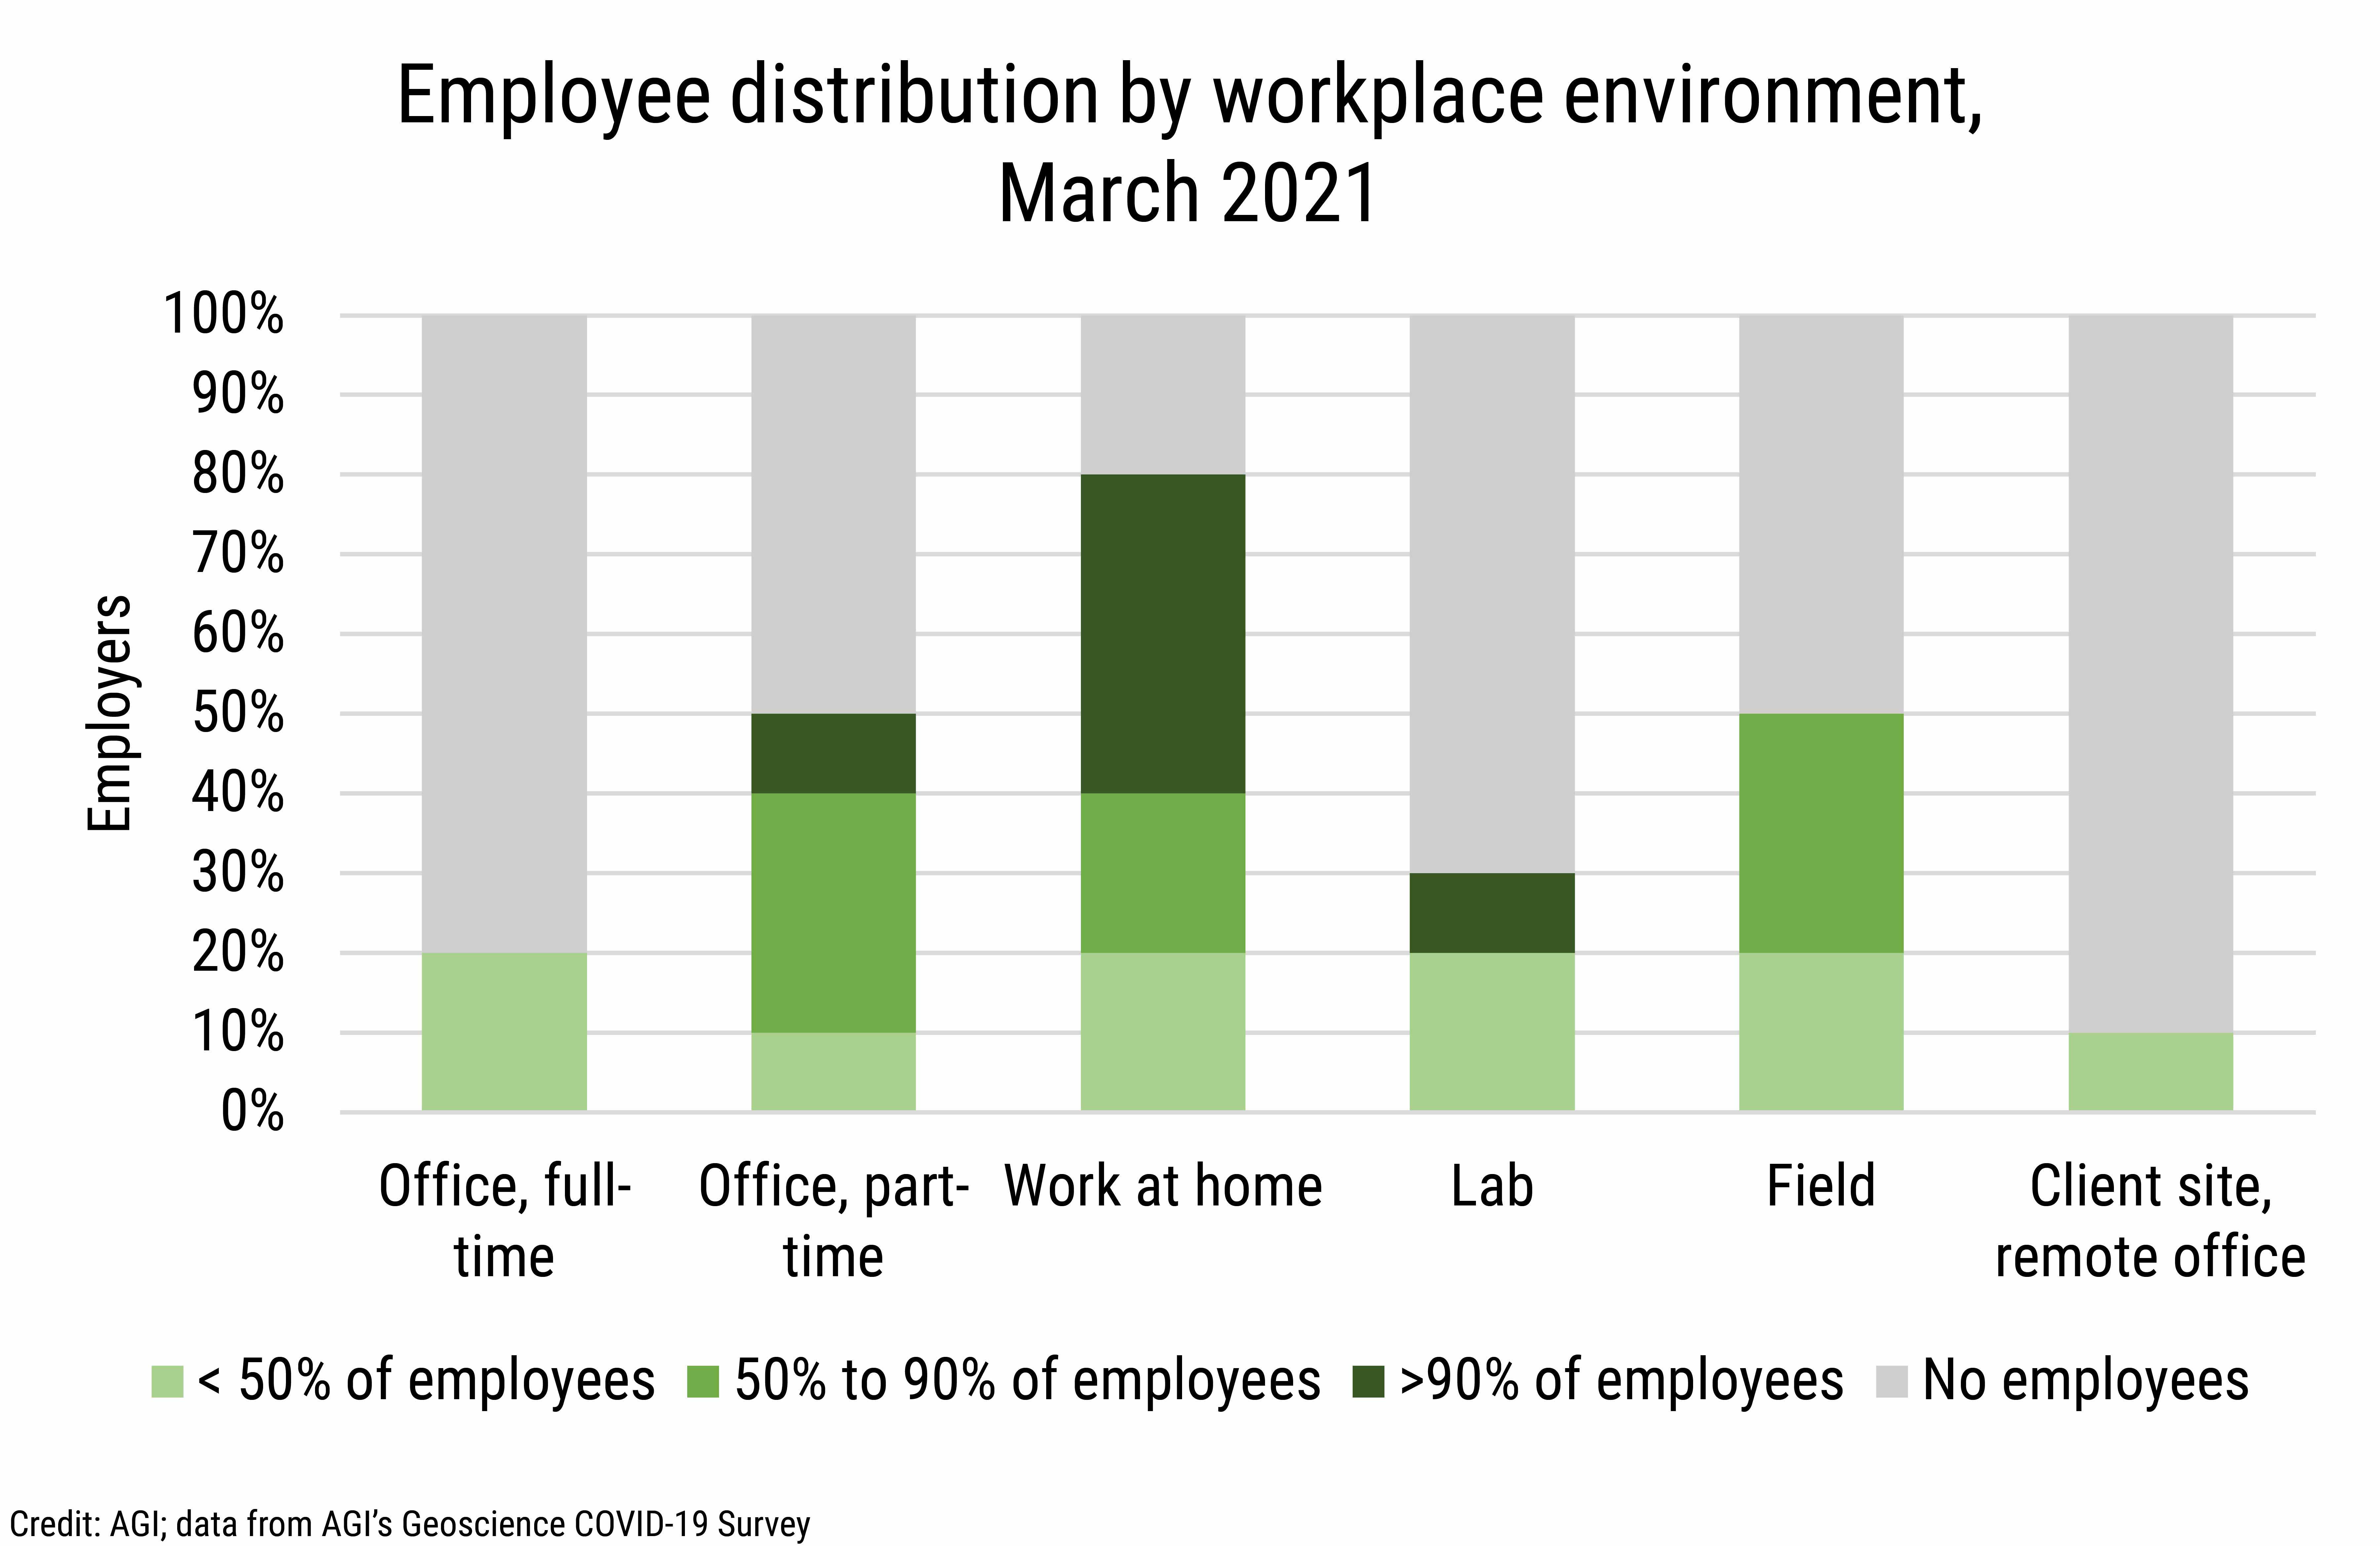 DB_2021-030 chart 06: Employee distribution by workplace environment, March 2021 (Credit: AGI; data from AGI's Geoscience COVID-19 Survey)